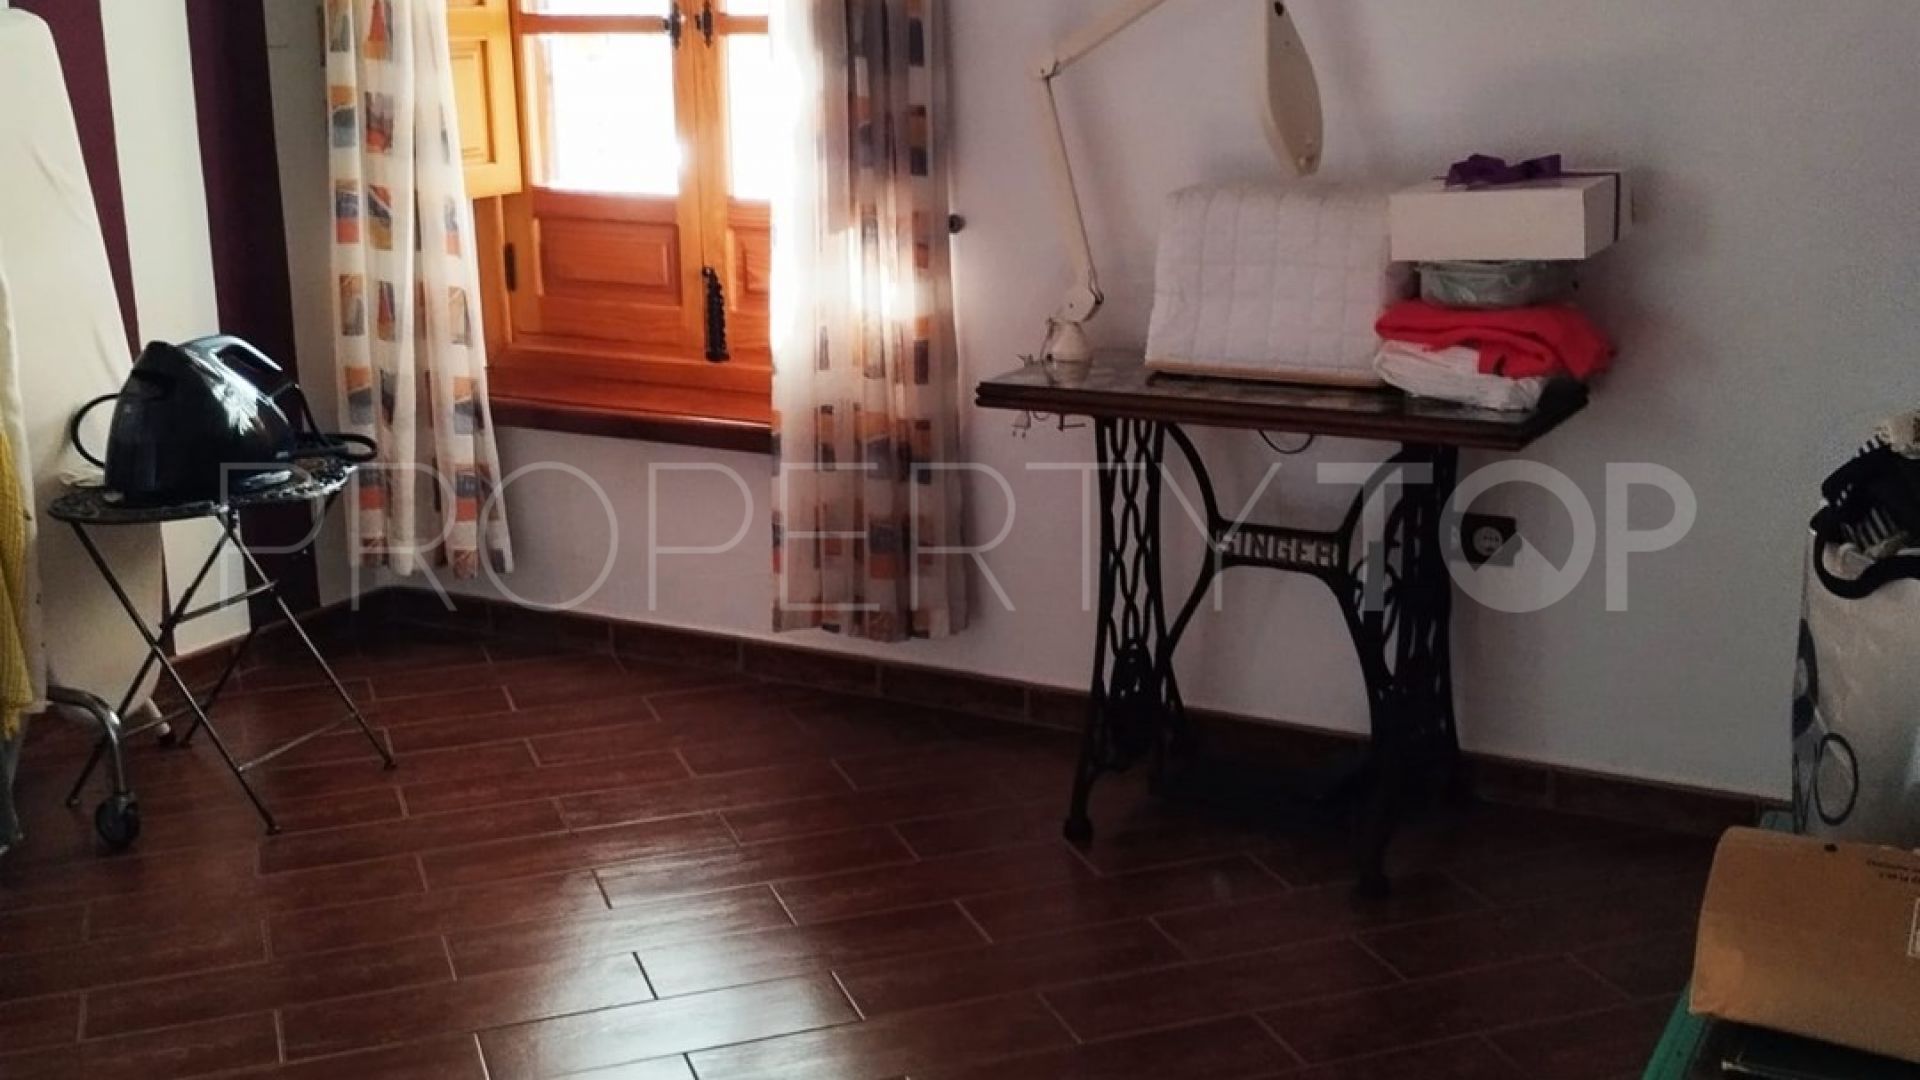 For sale Torremolinos house with 4 bedrooms